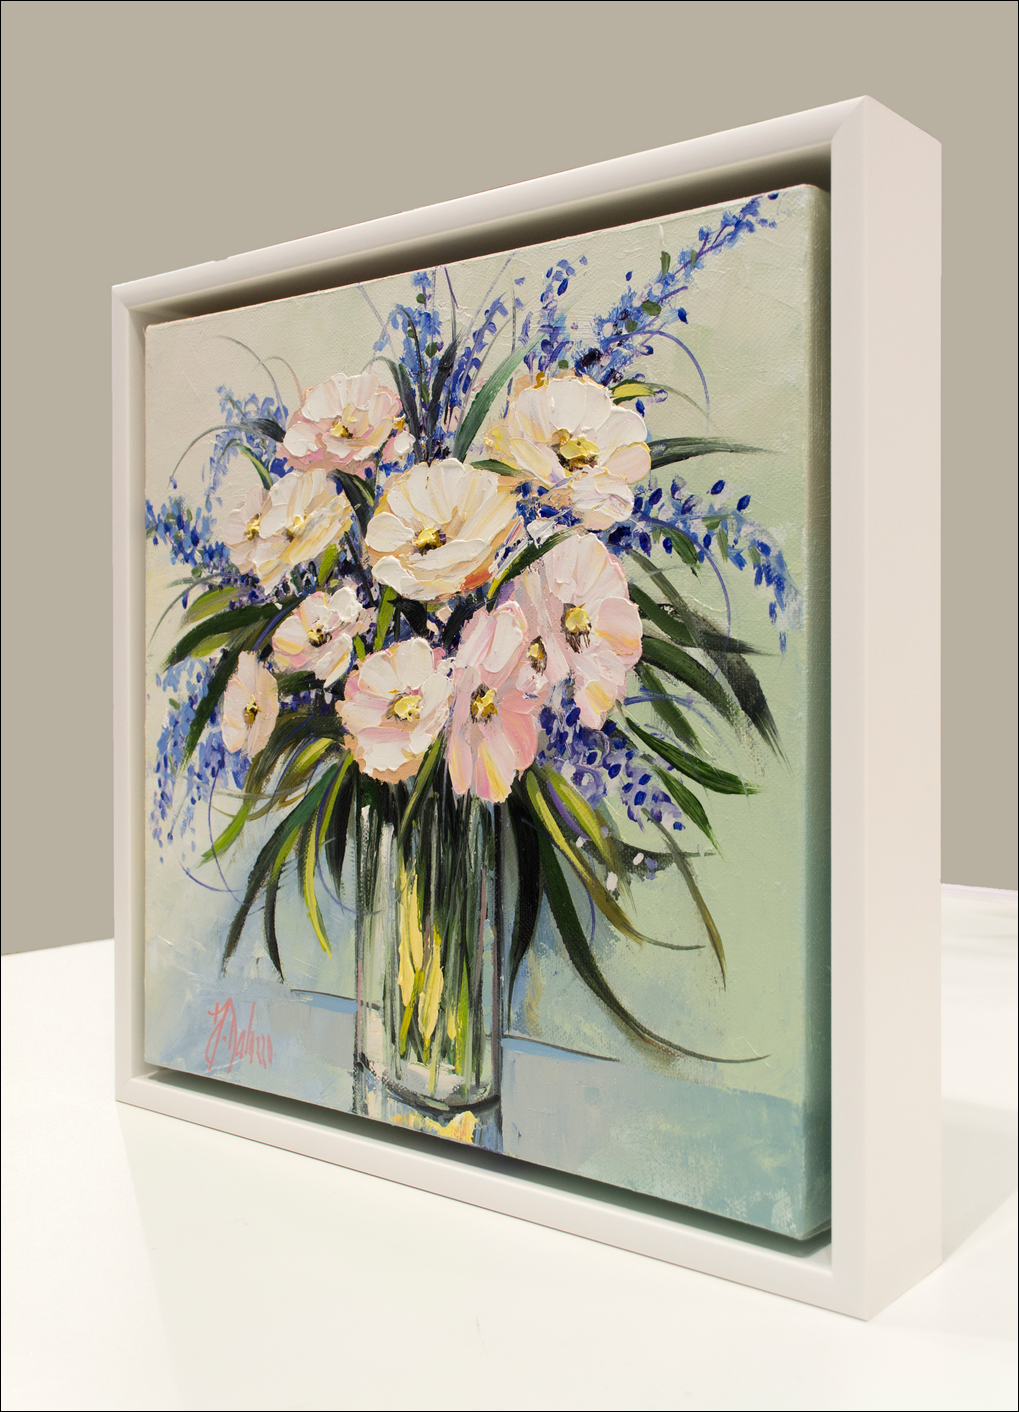 Framed Side View Of Still Life Painting "Forget Me Nots" By Judith Dalozzo